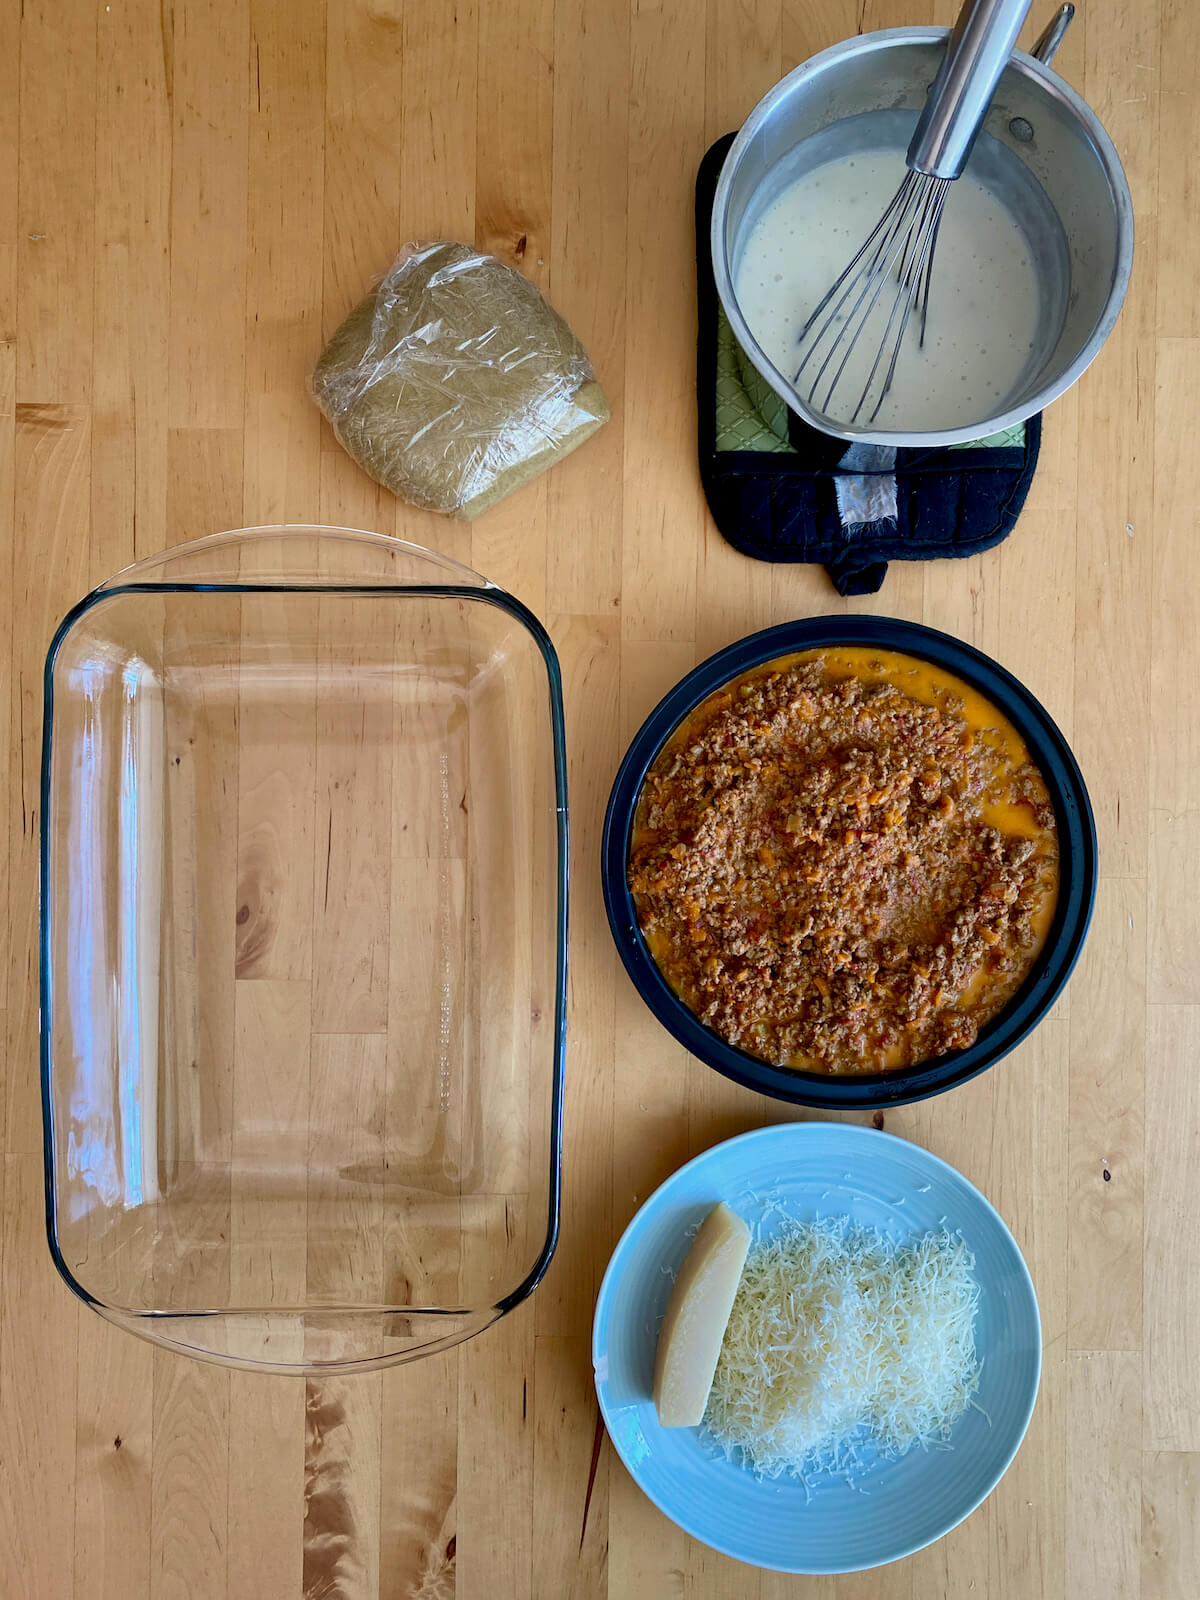 The components to make the lasagna laid out on the counter ready to be assembled in a glass baking dish.